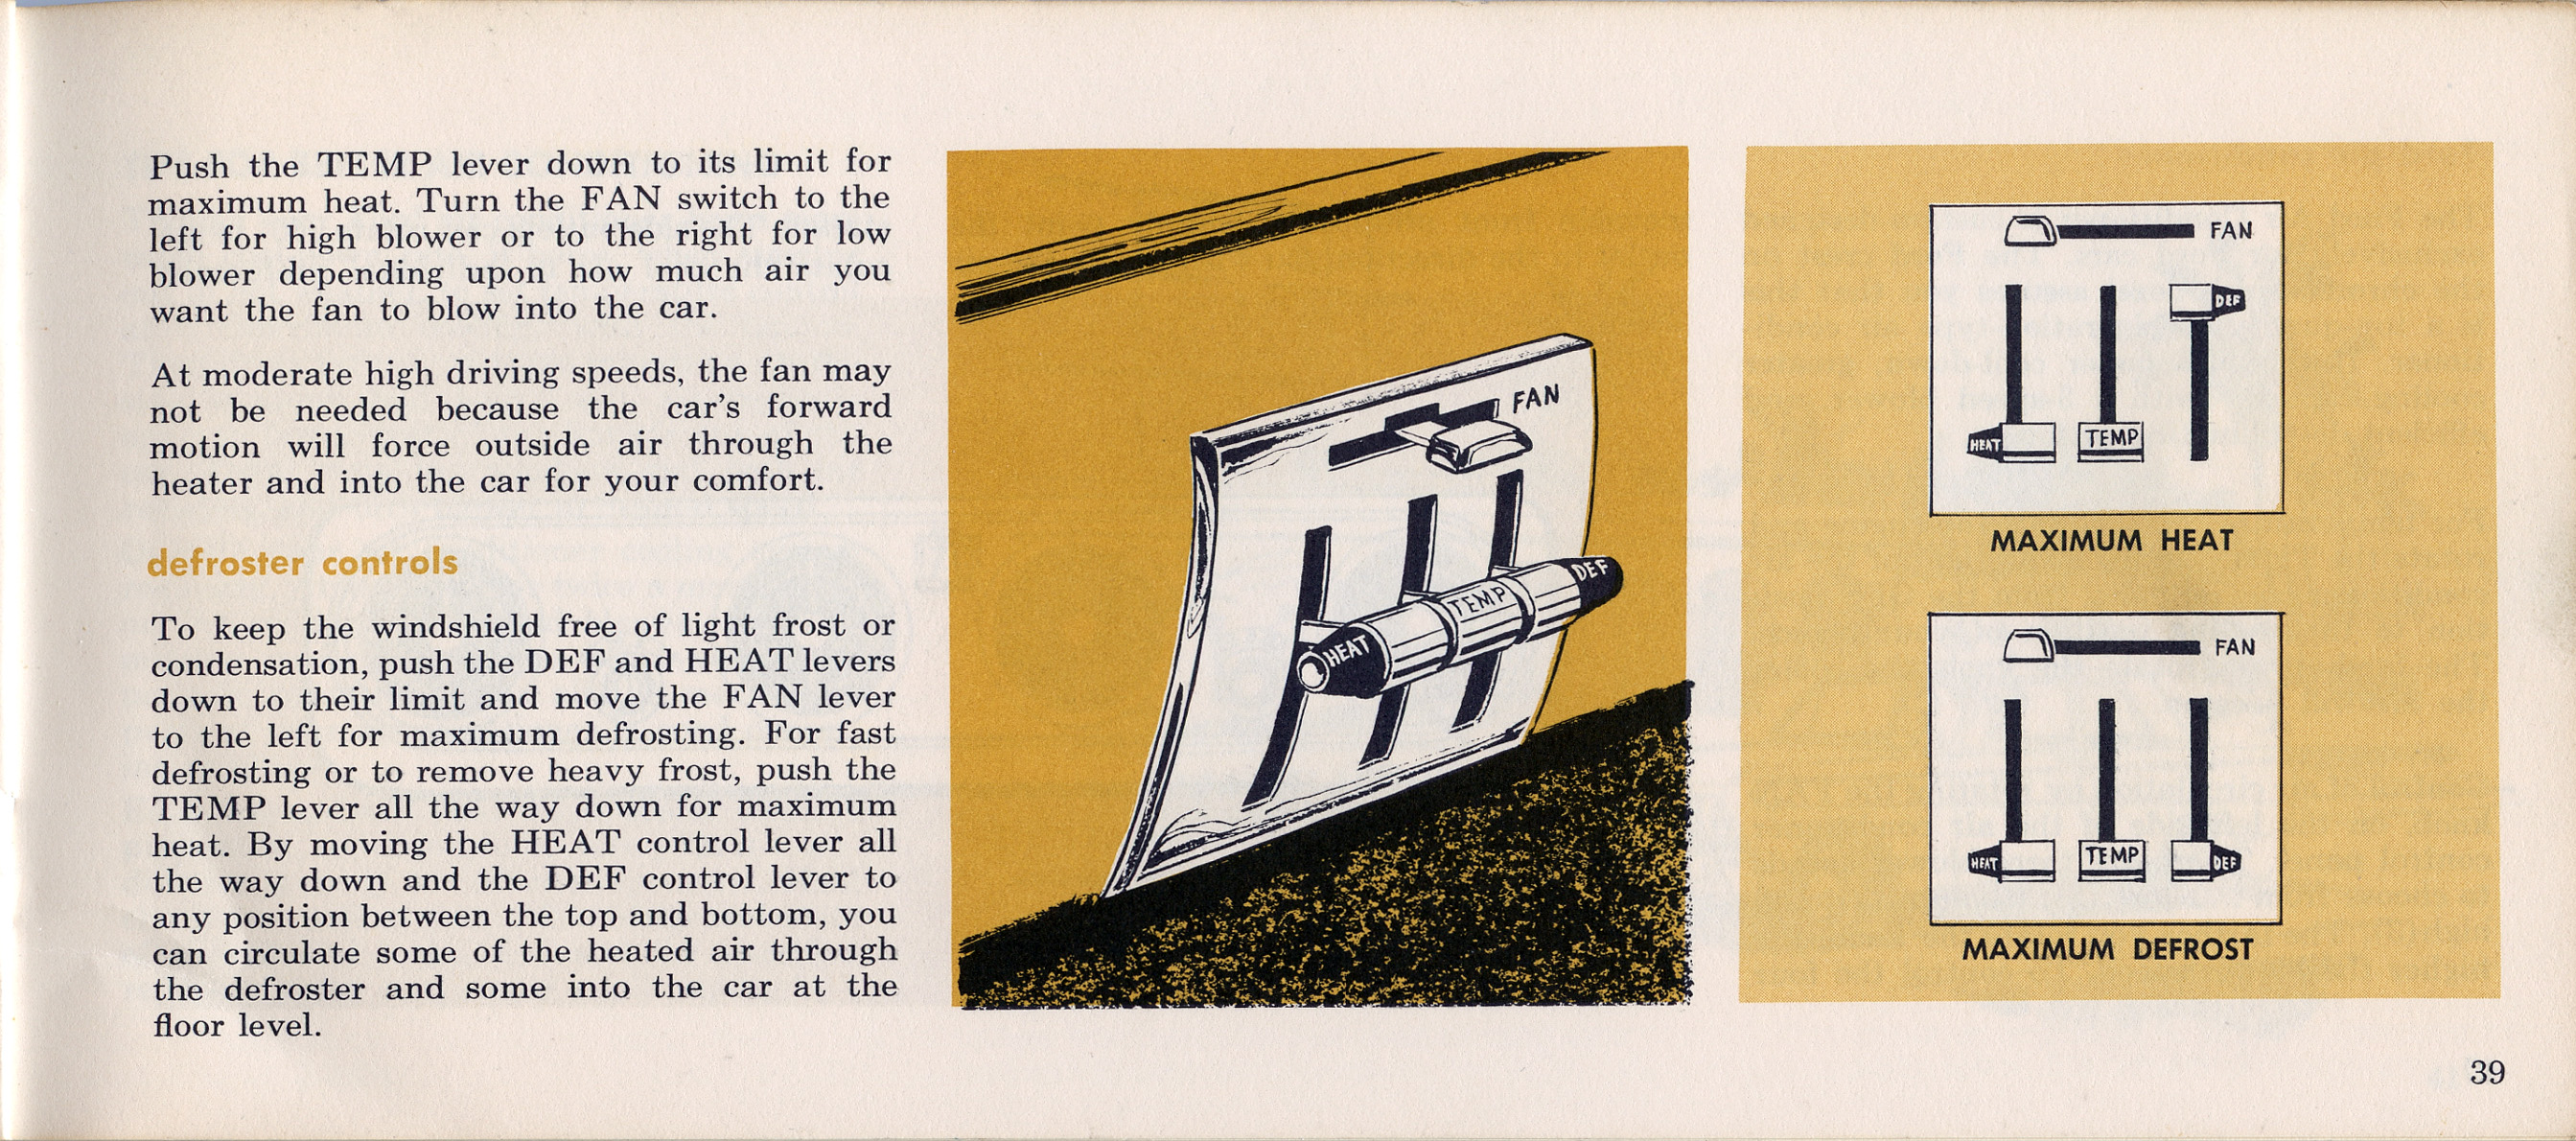 1964 Ford Falcon Owners Manual-39